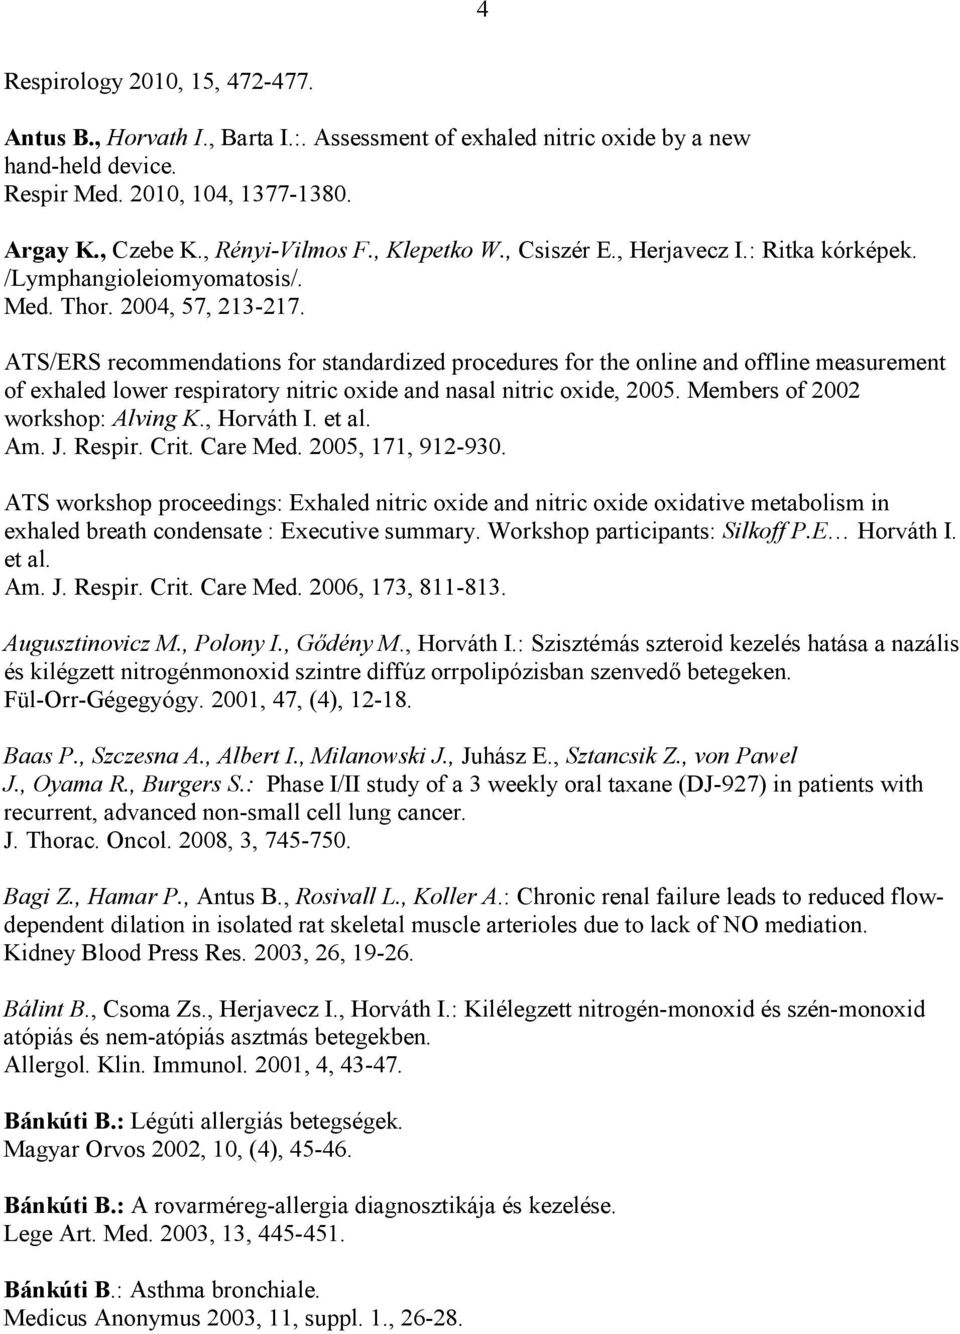 ATS/ERS recommendations for standardized procedures for the online and offline measurement of exhaled lower respiratory nitric oxide and nasal nitric oxide, 2005. Members of 2002 workshop: Alving K.